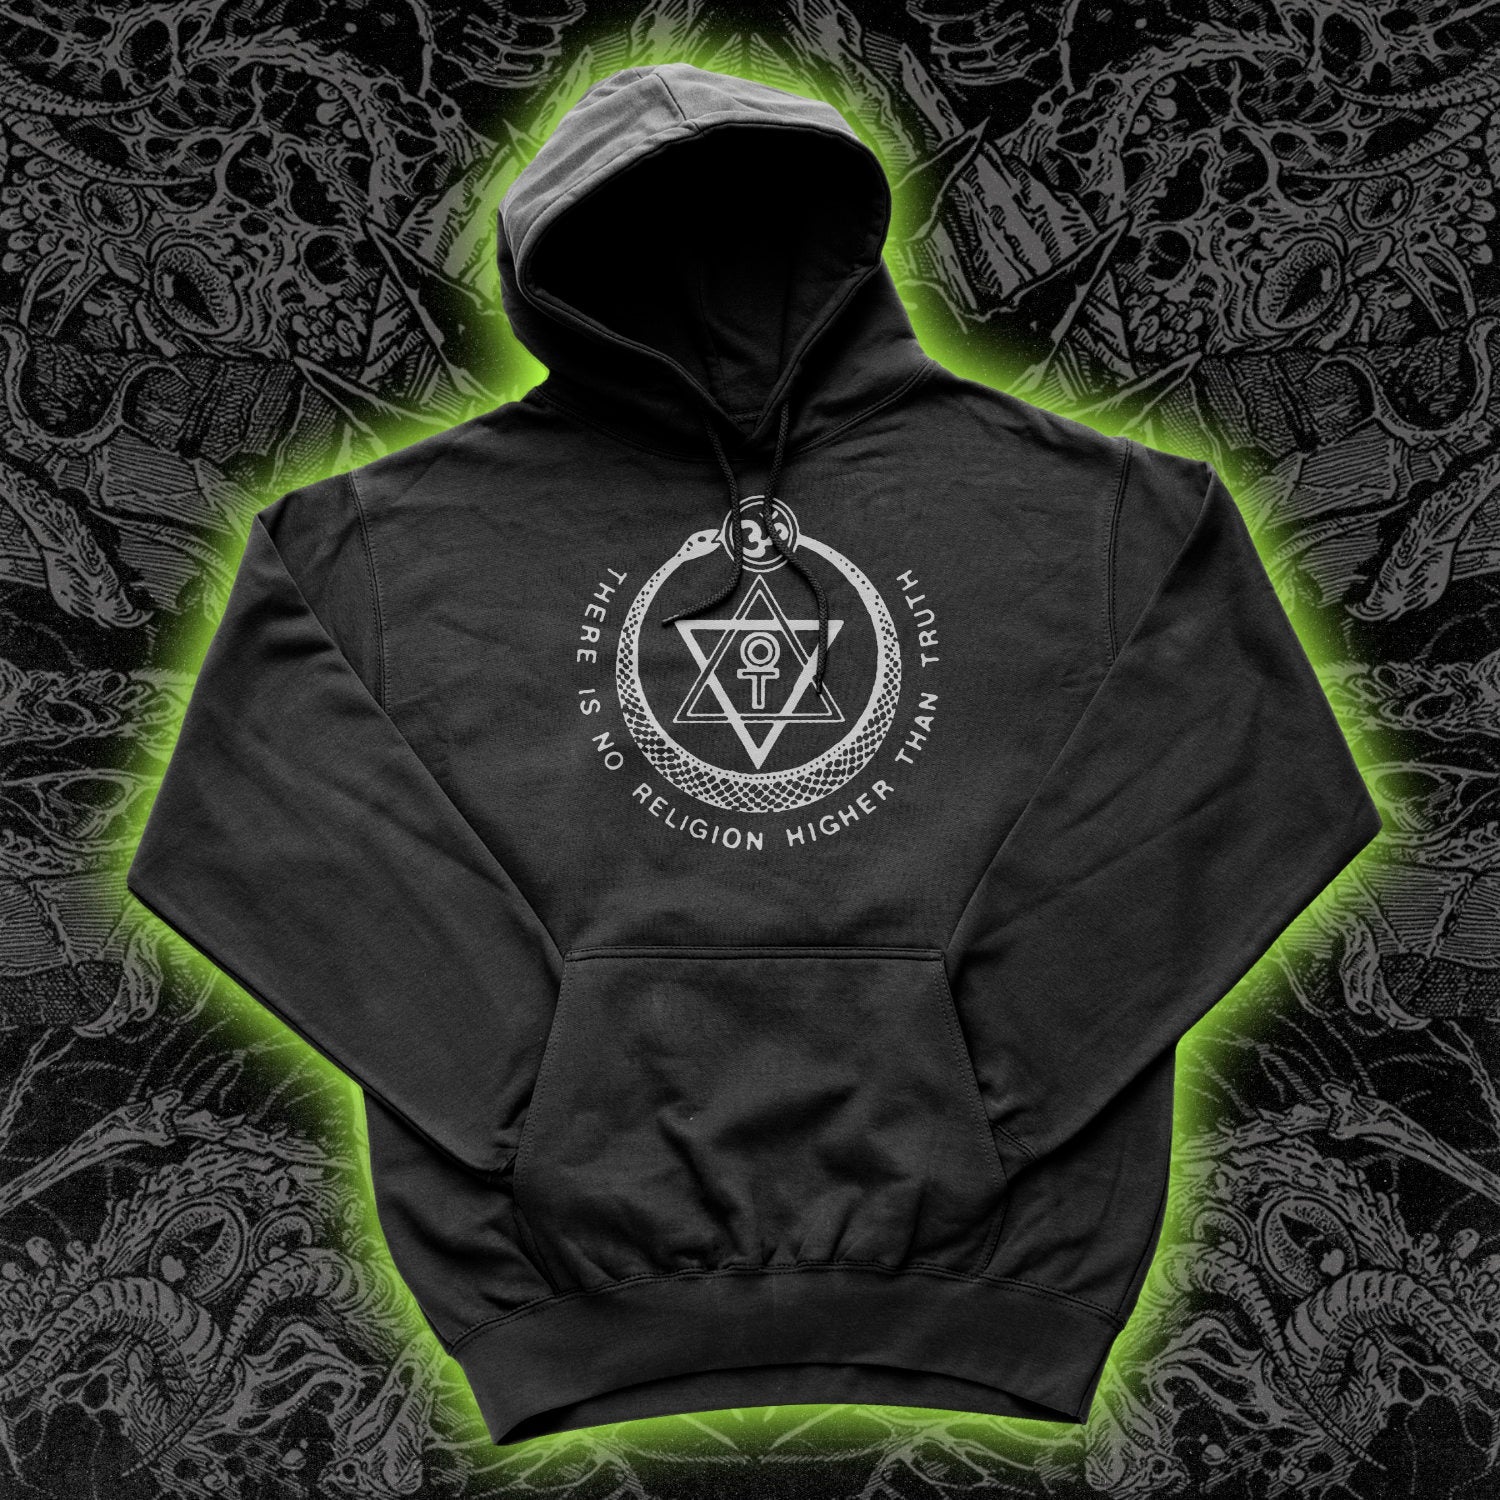 No Religion Higher Than Truth Hoodie